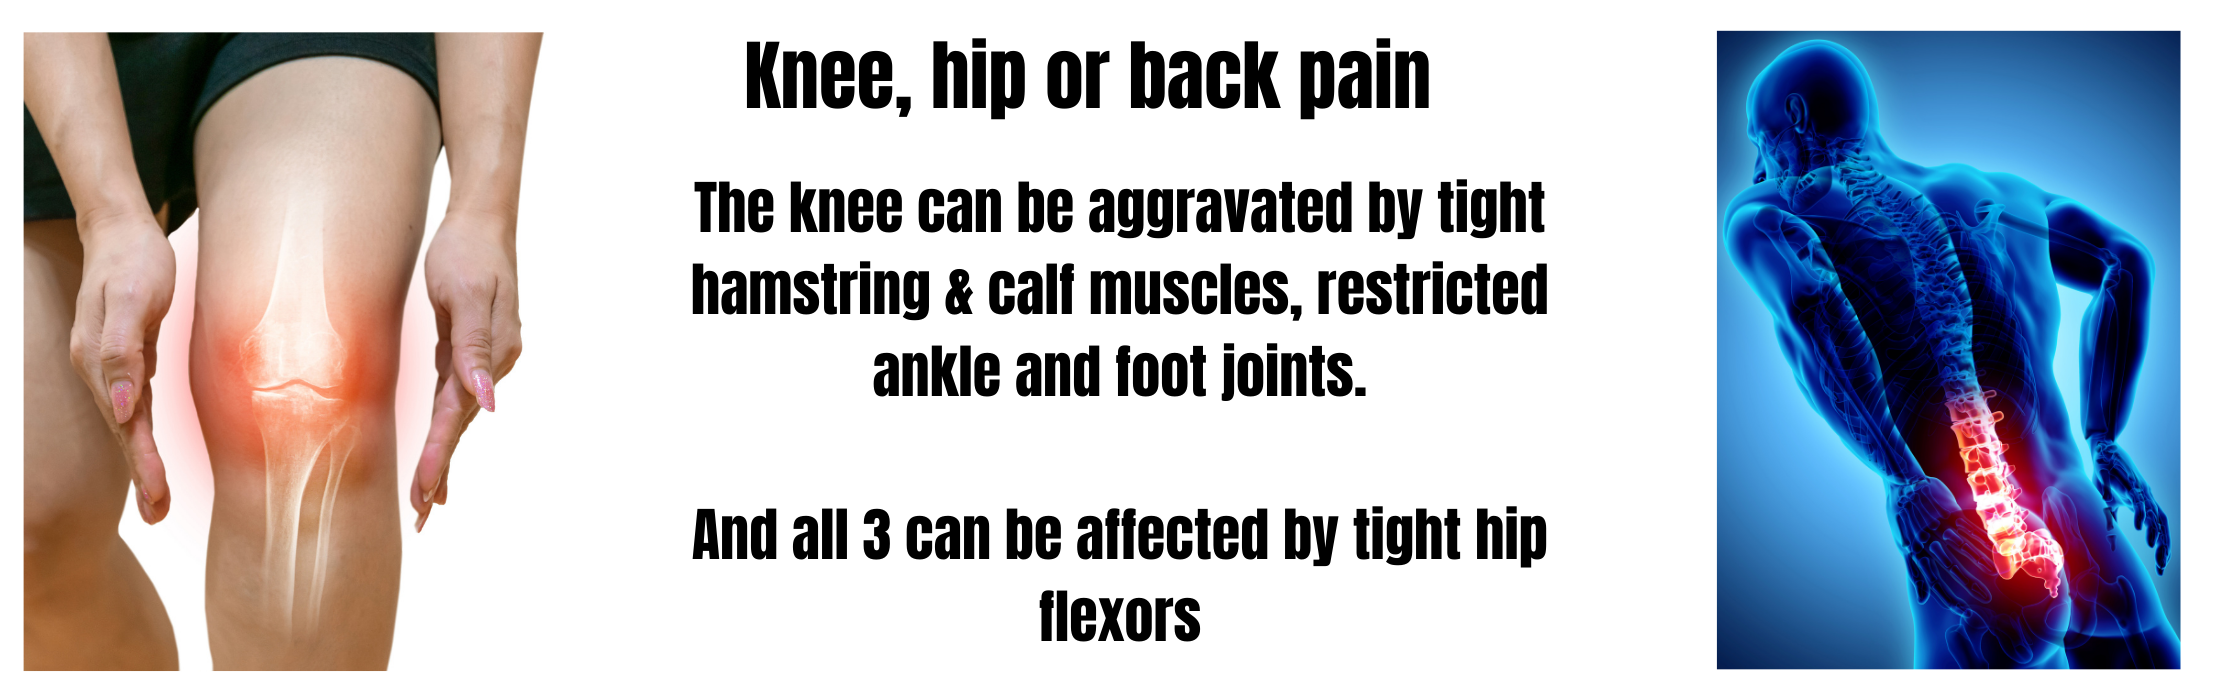 Knee, hip or back pain aggravated by the foot & ankleure